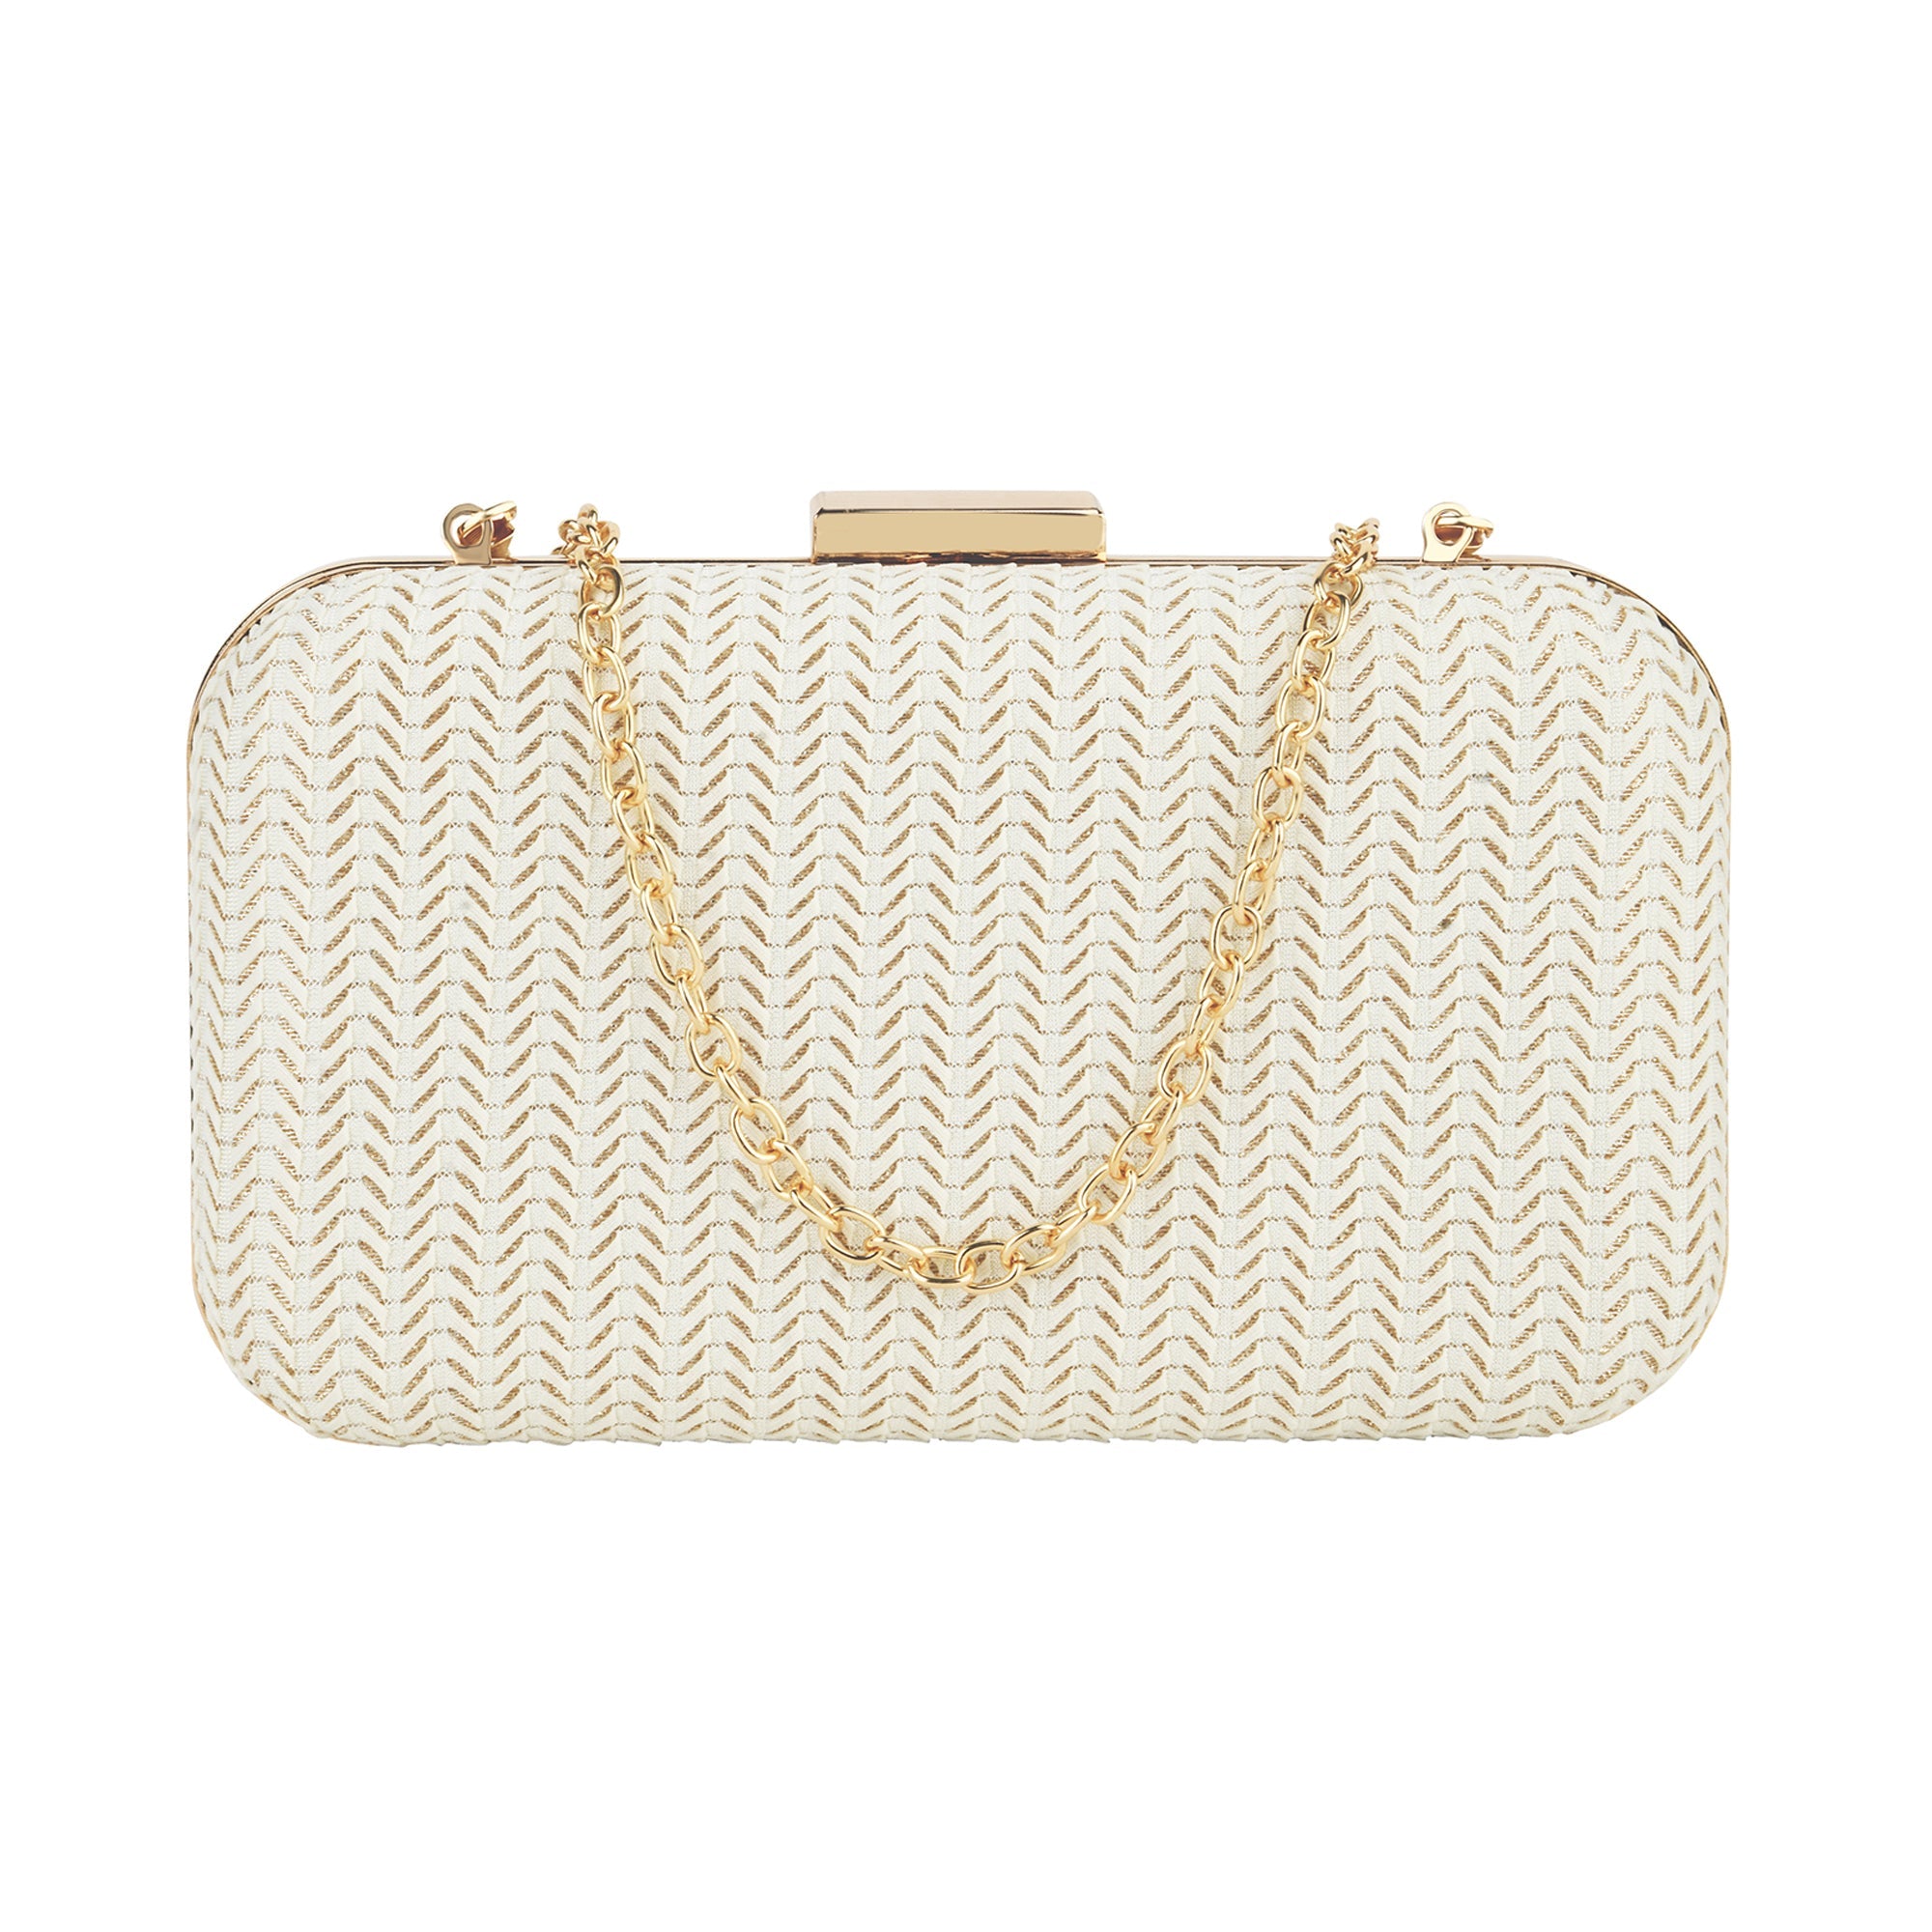 Accessorize London Women's Ivory Alicia Evening Party Hardcase Clutch